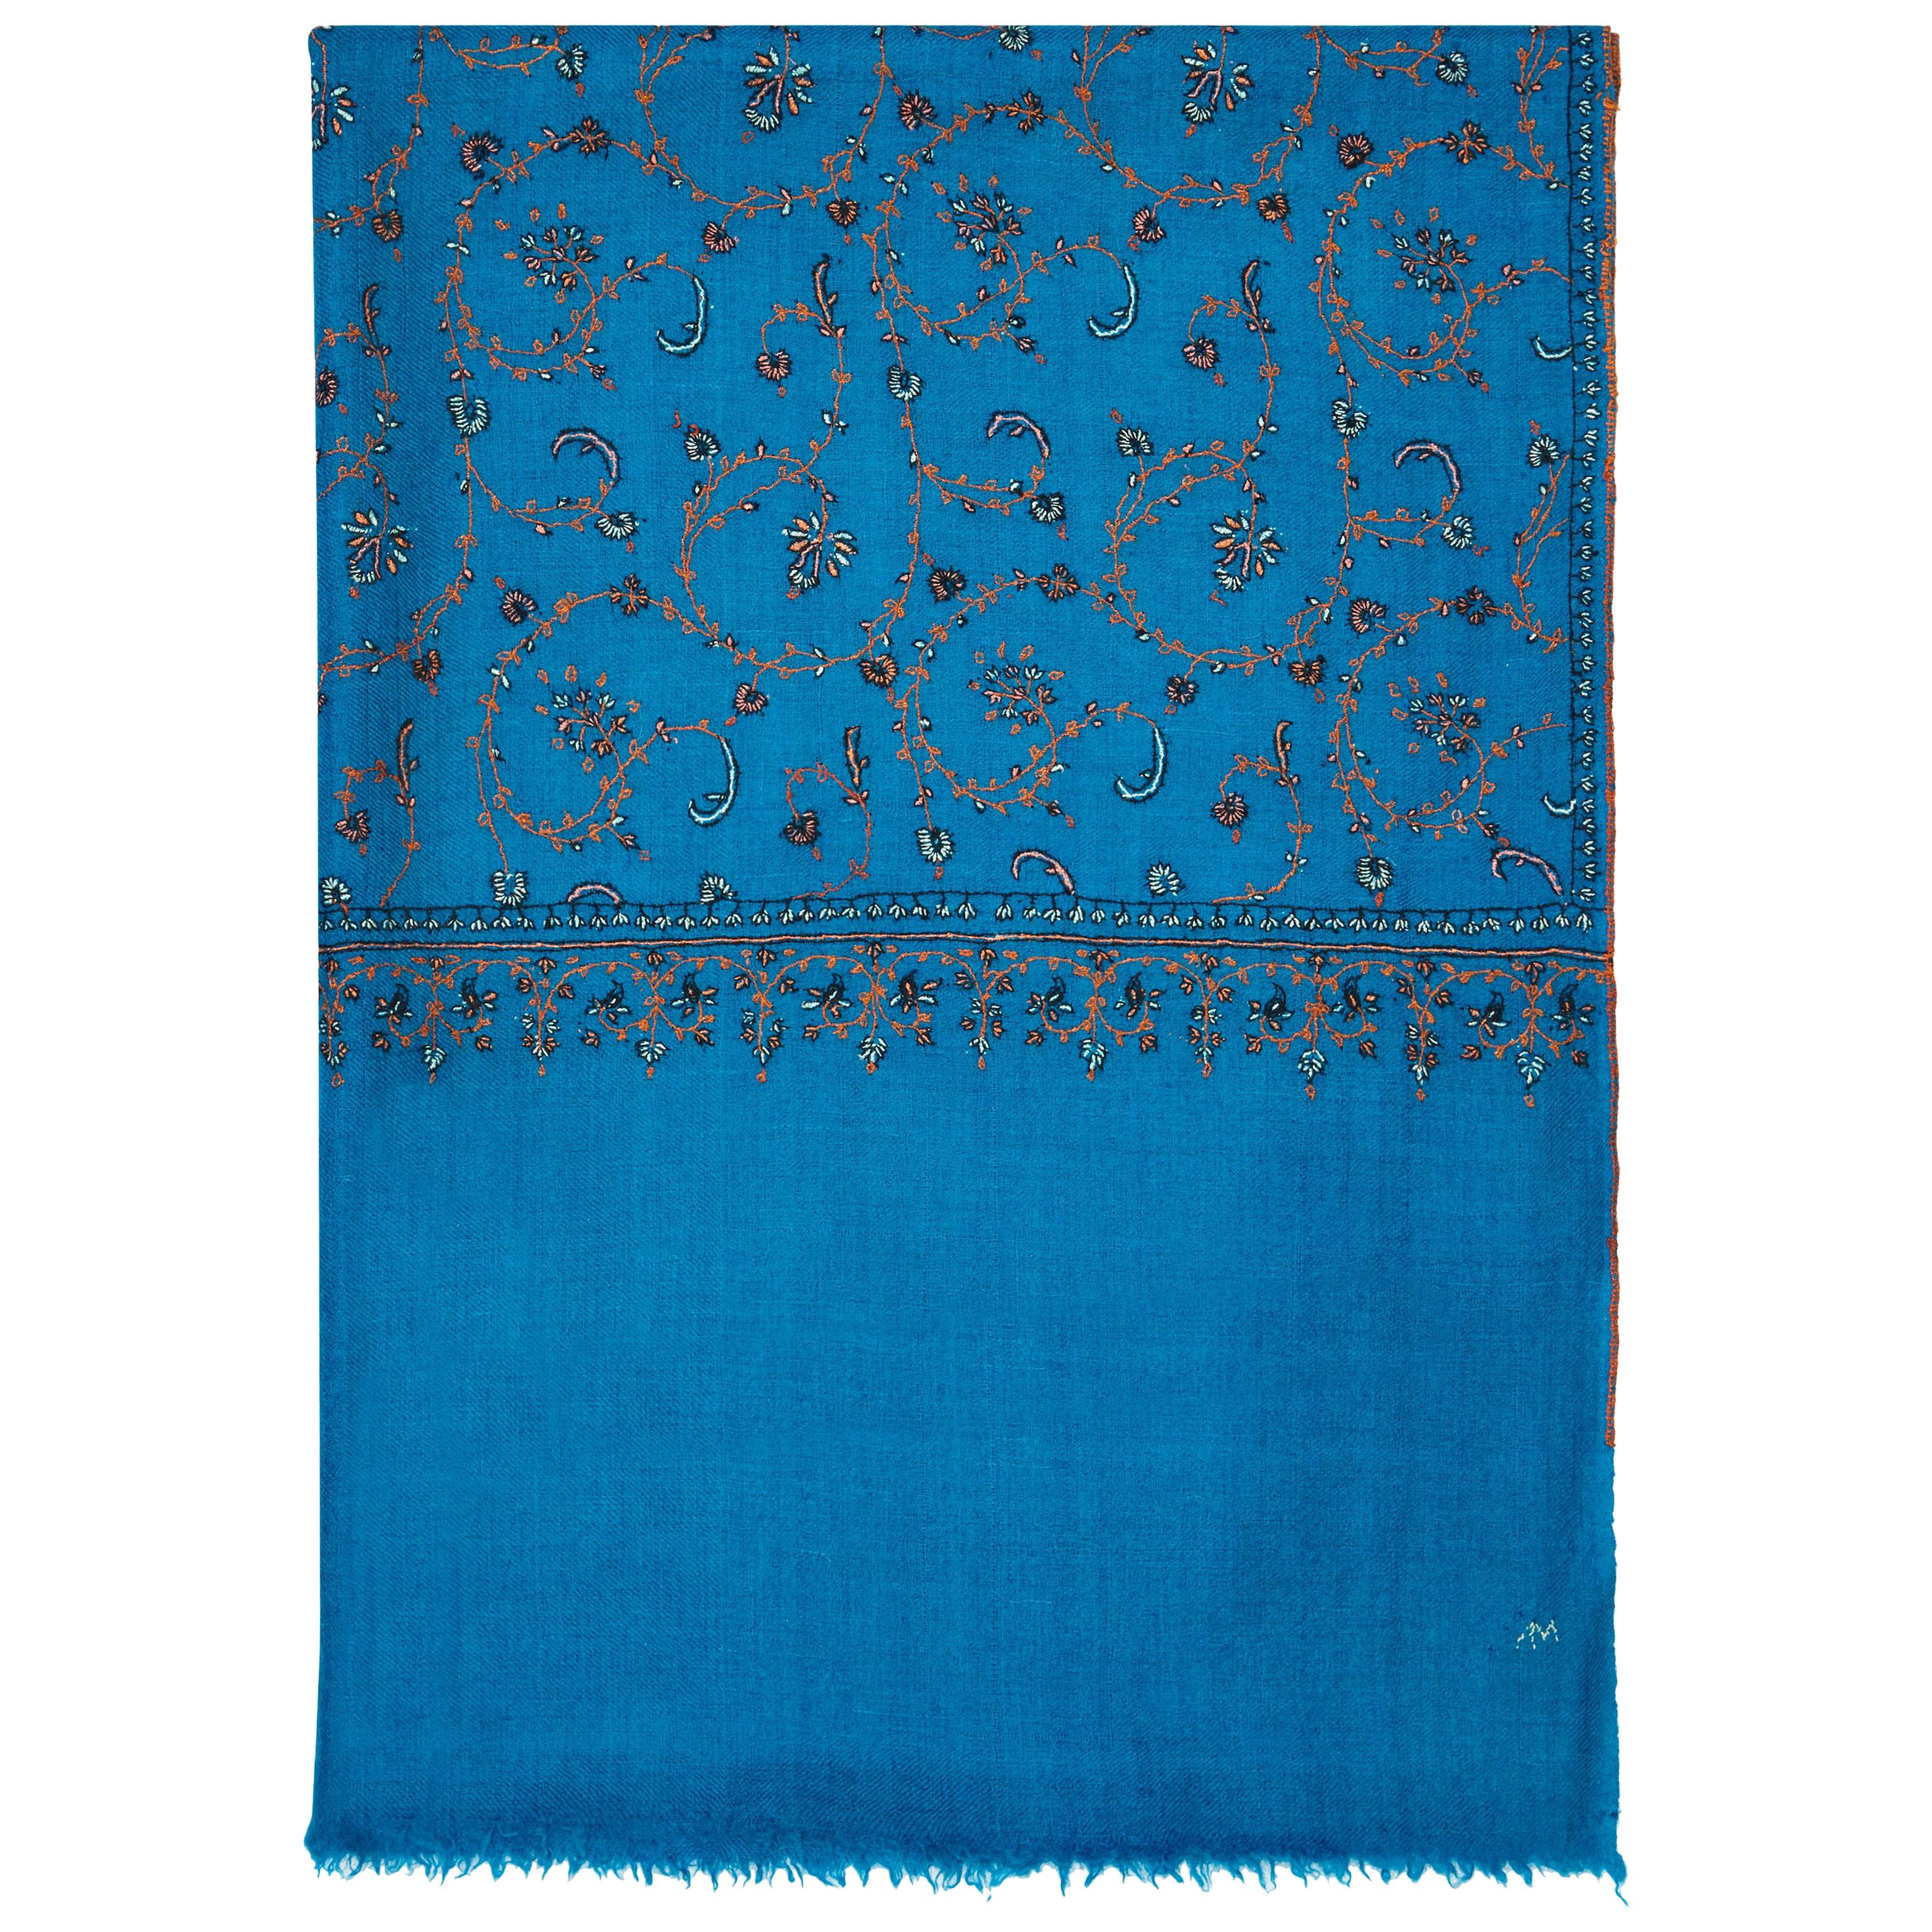 Limited Edition Hand Embroidered Cashmere Scarf in Blue Made in Kashmir - Gift